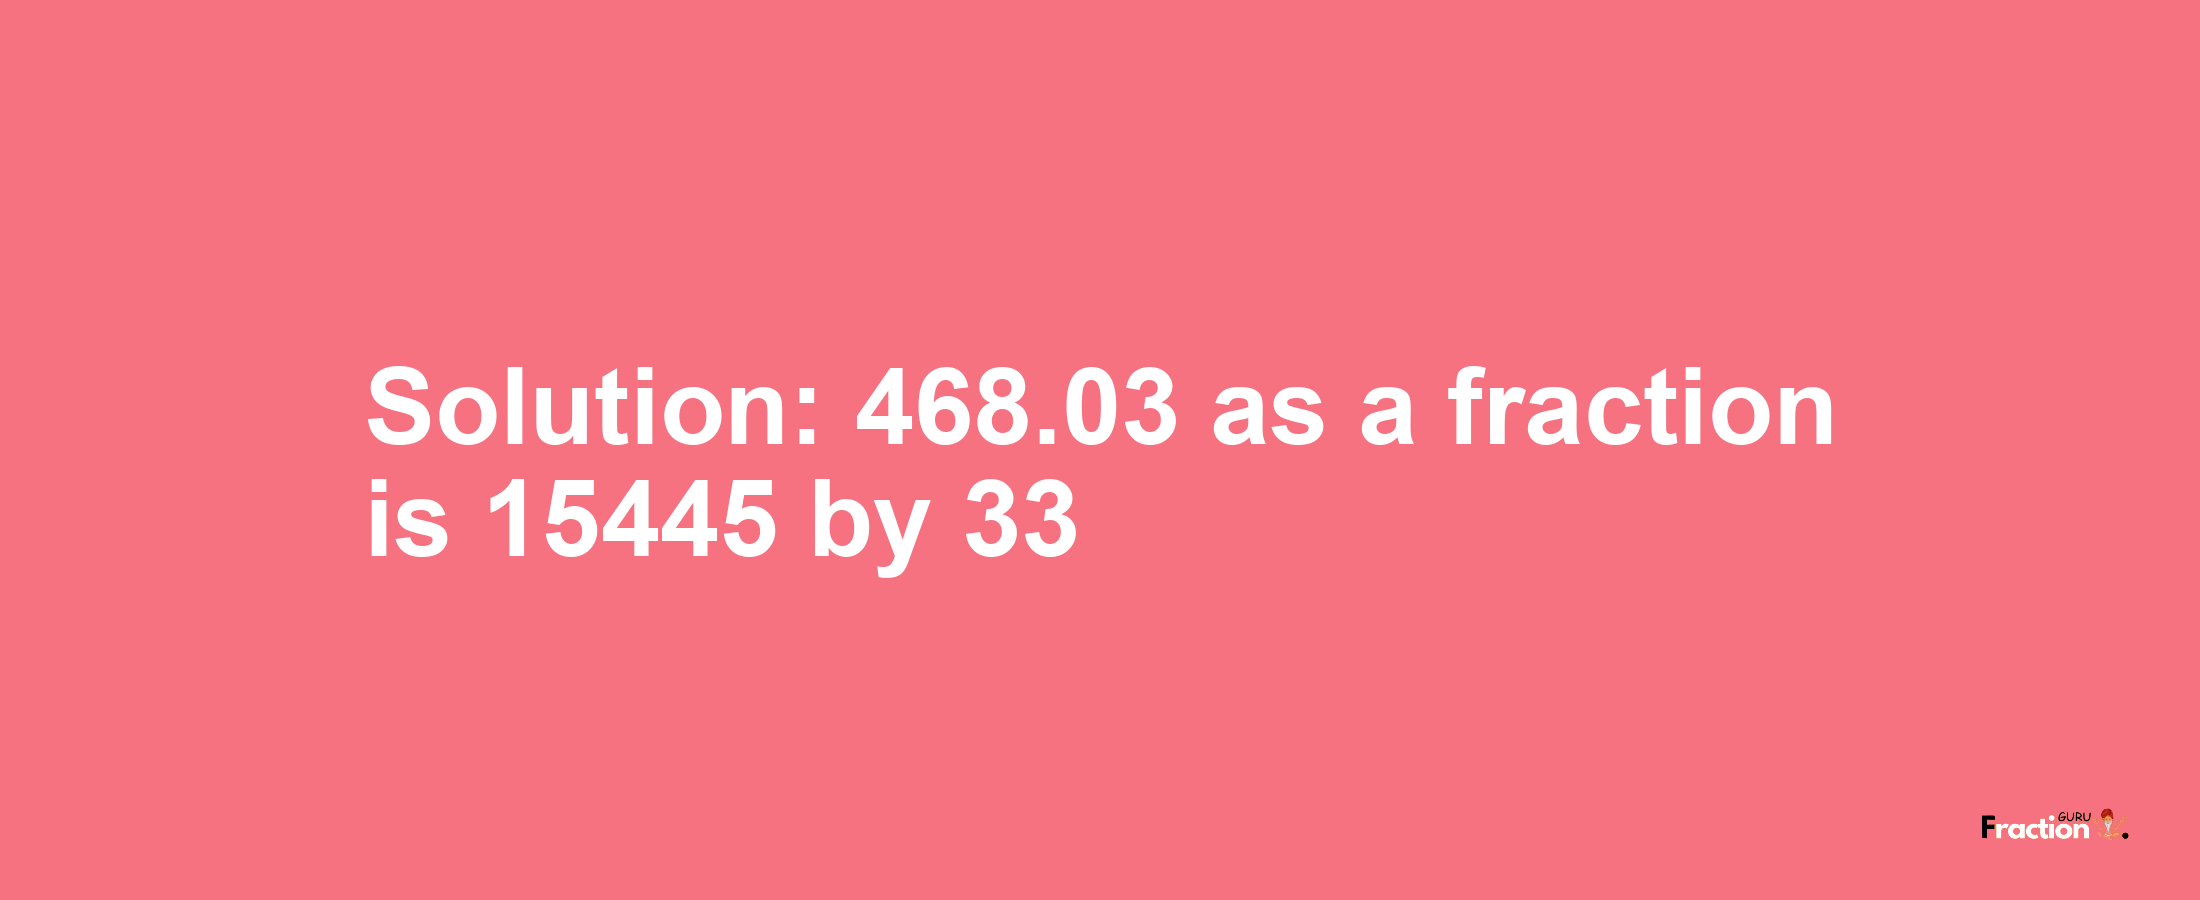 Solution:468.03 as a fraction is 15445/33